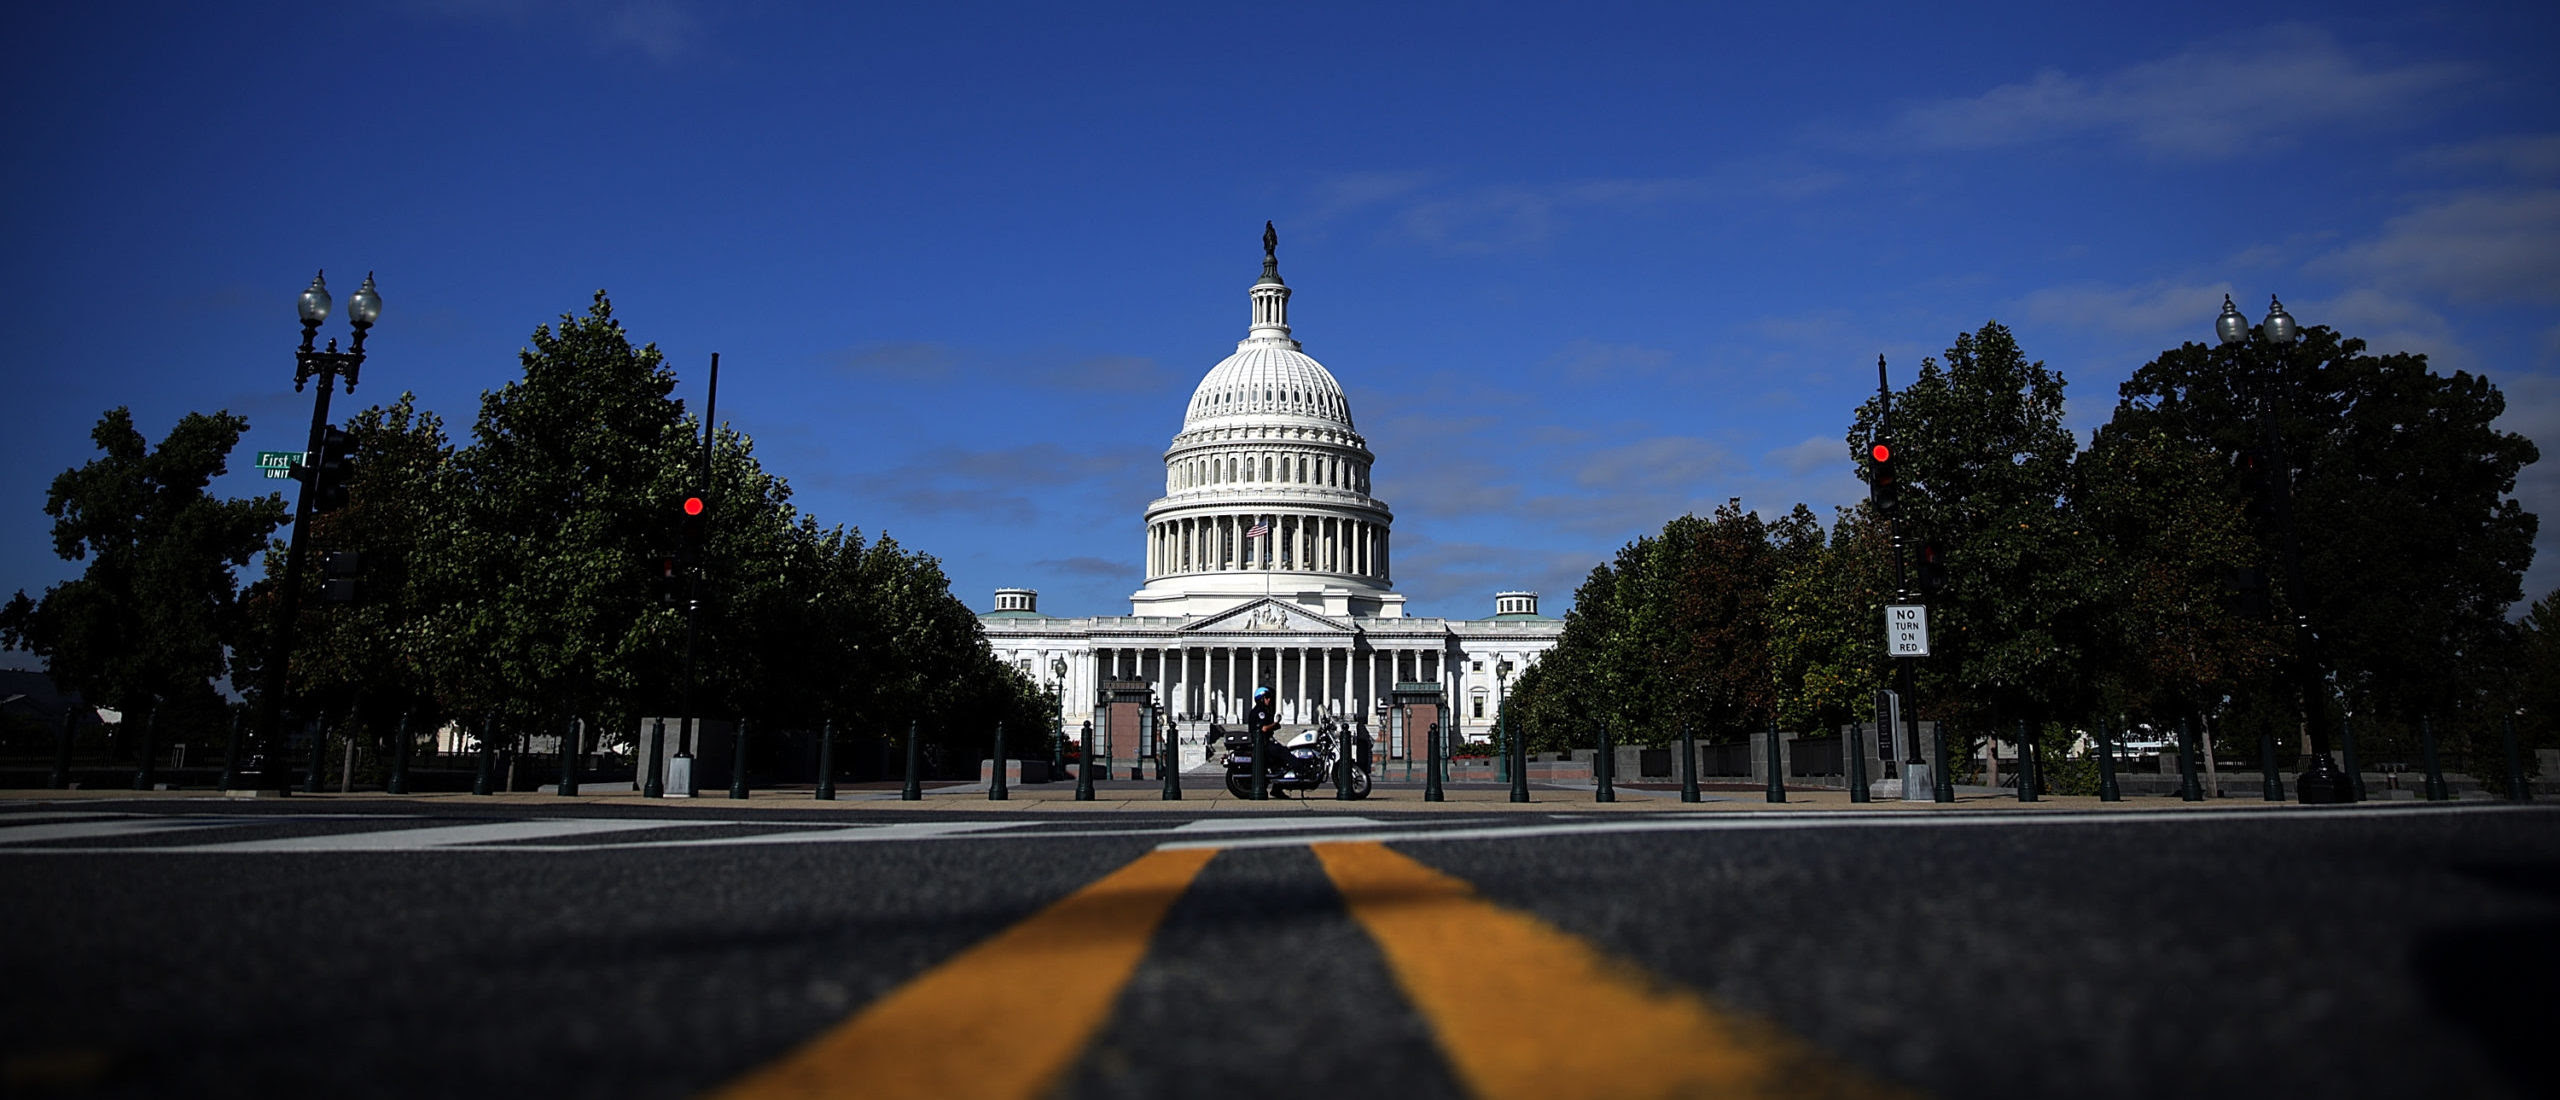 Here Are Some Of The Key Things Conservative Groups Want The 118th Congress To Prioritize